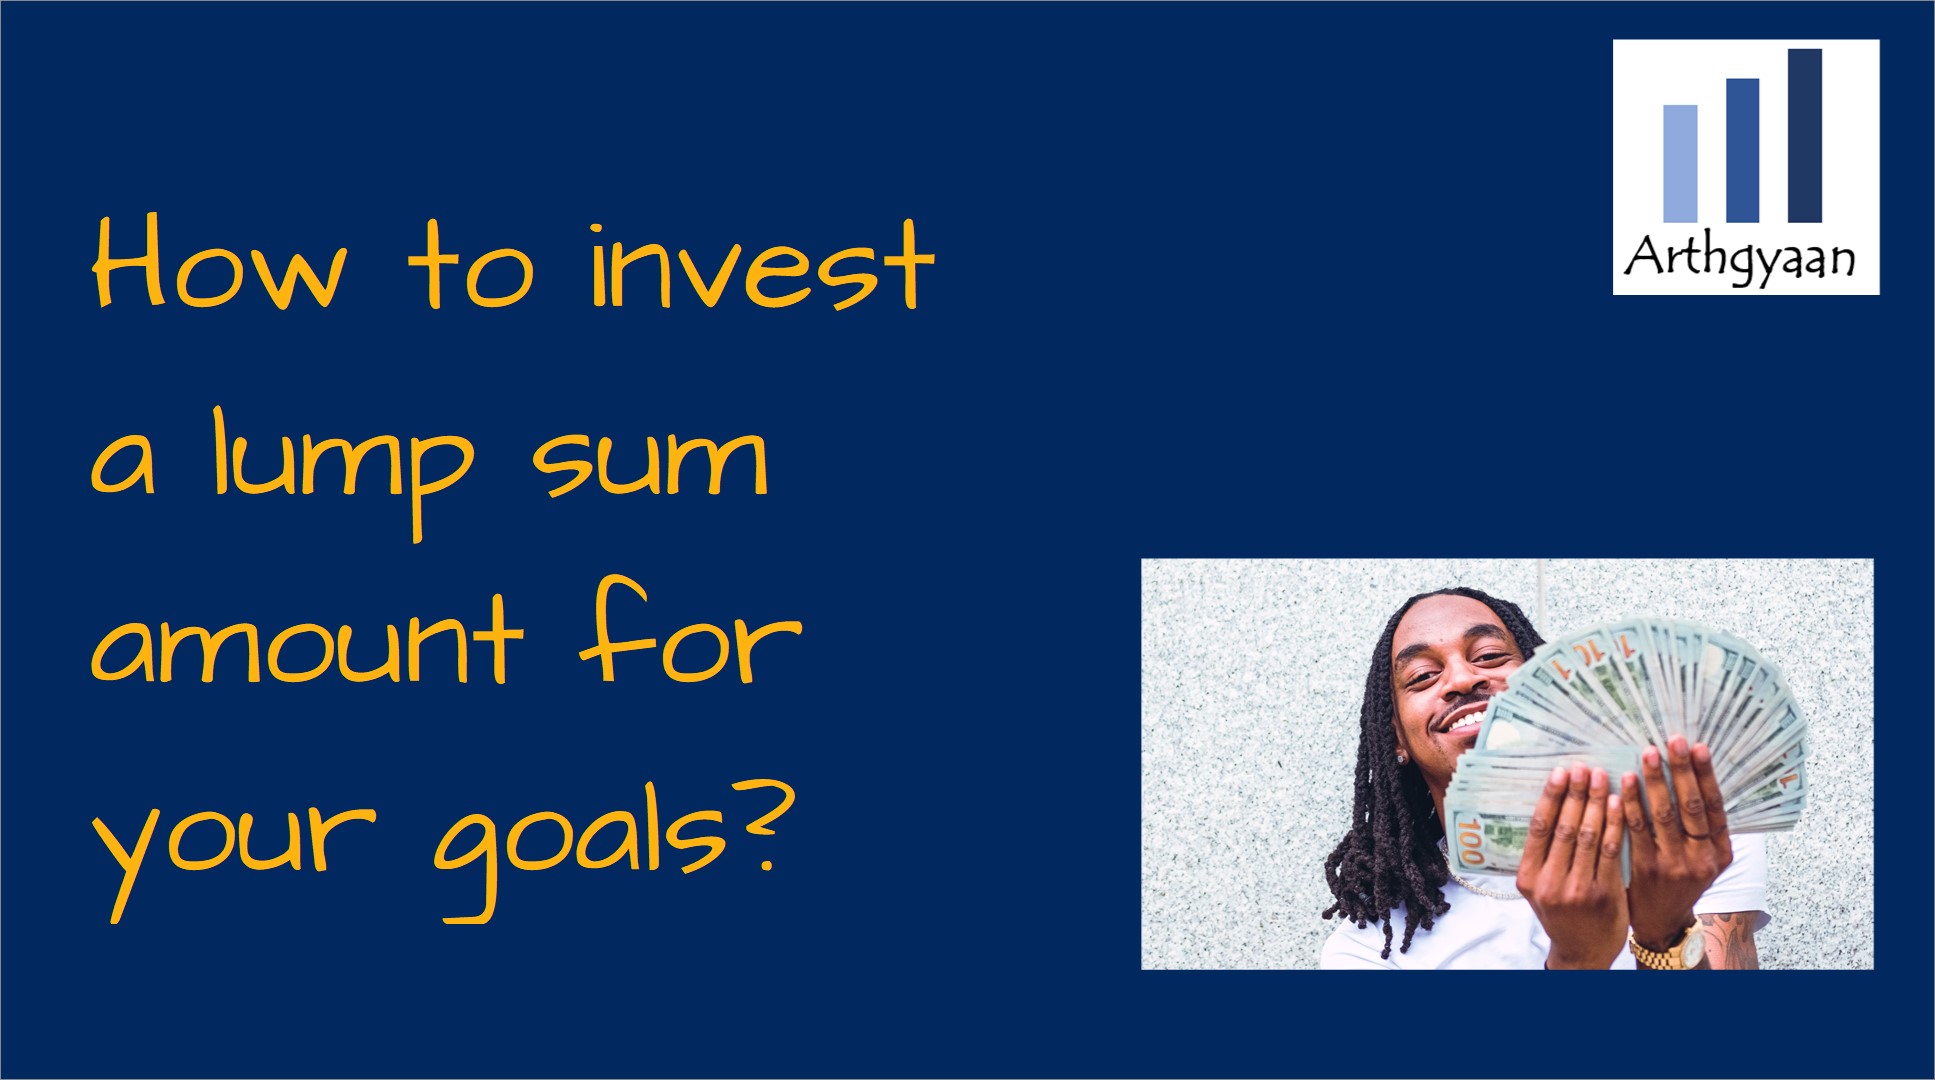 How to invest a lump sum amount for your goals?